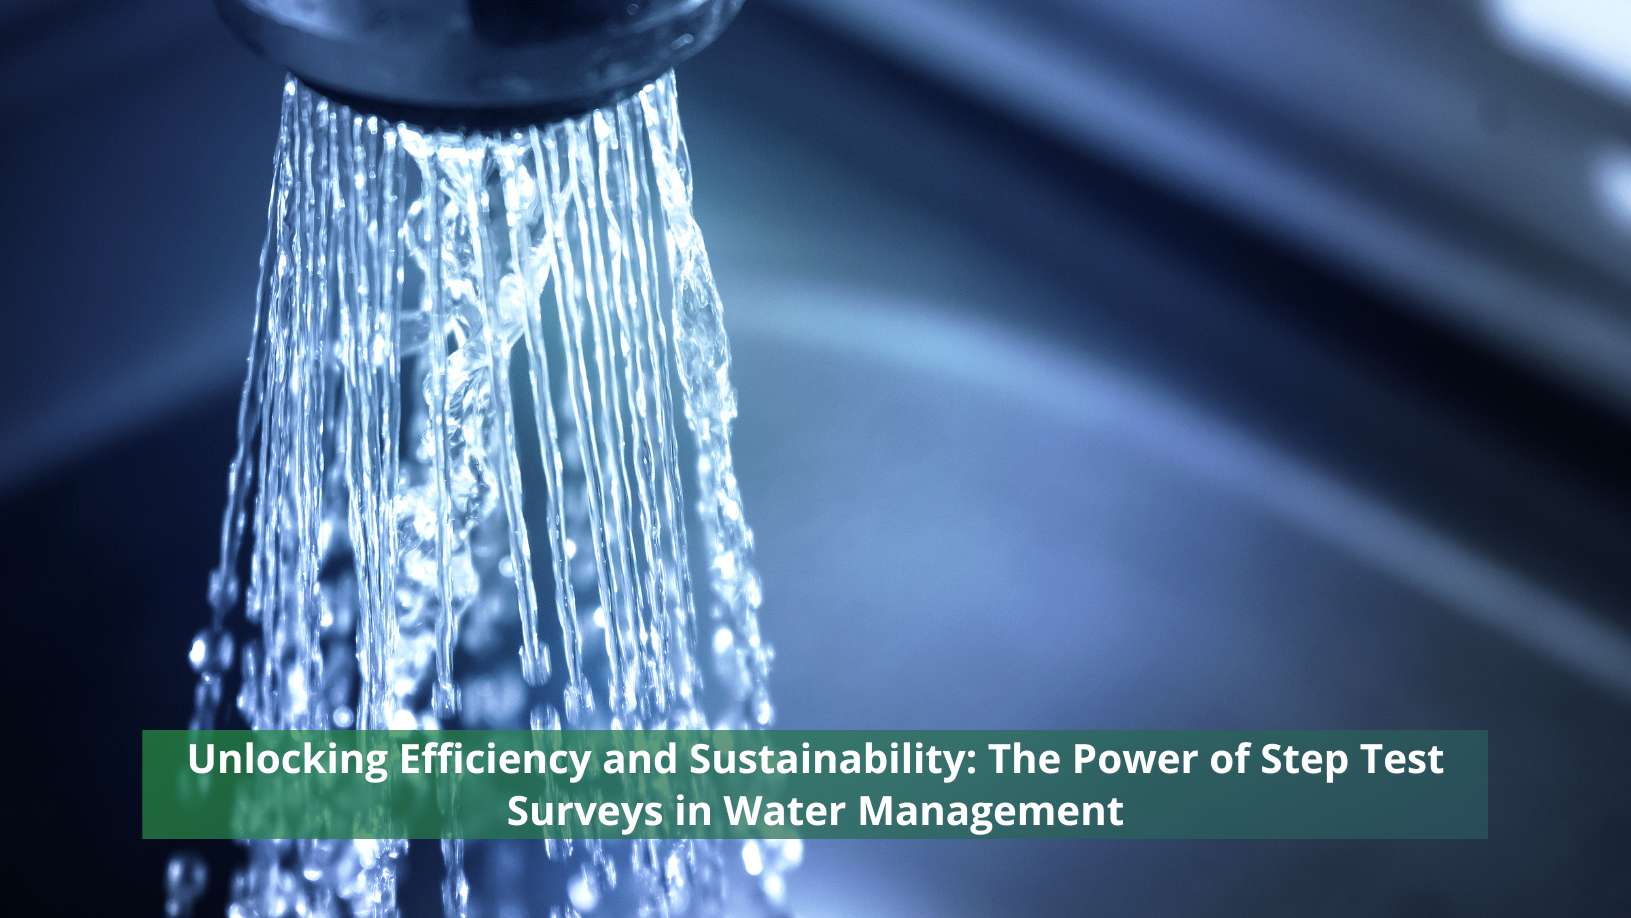 Unlocking Efficiency and Sustainability The Power of Step Test Surveys in Water Management